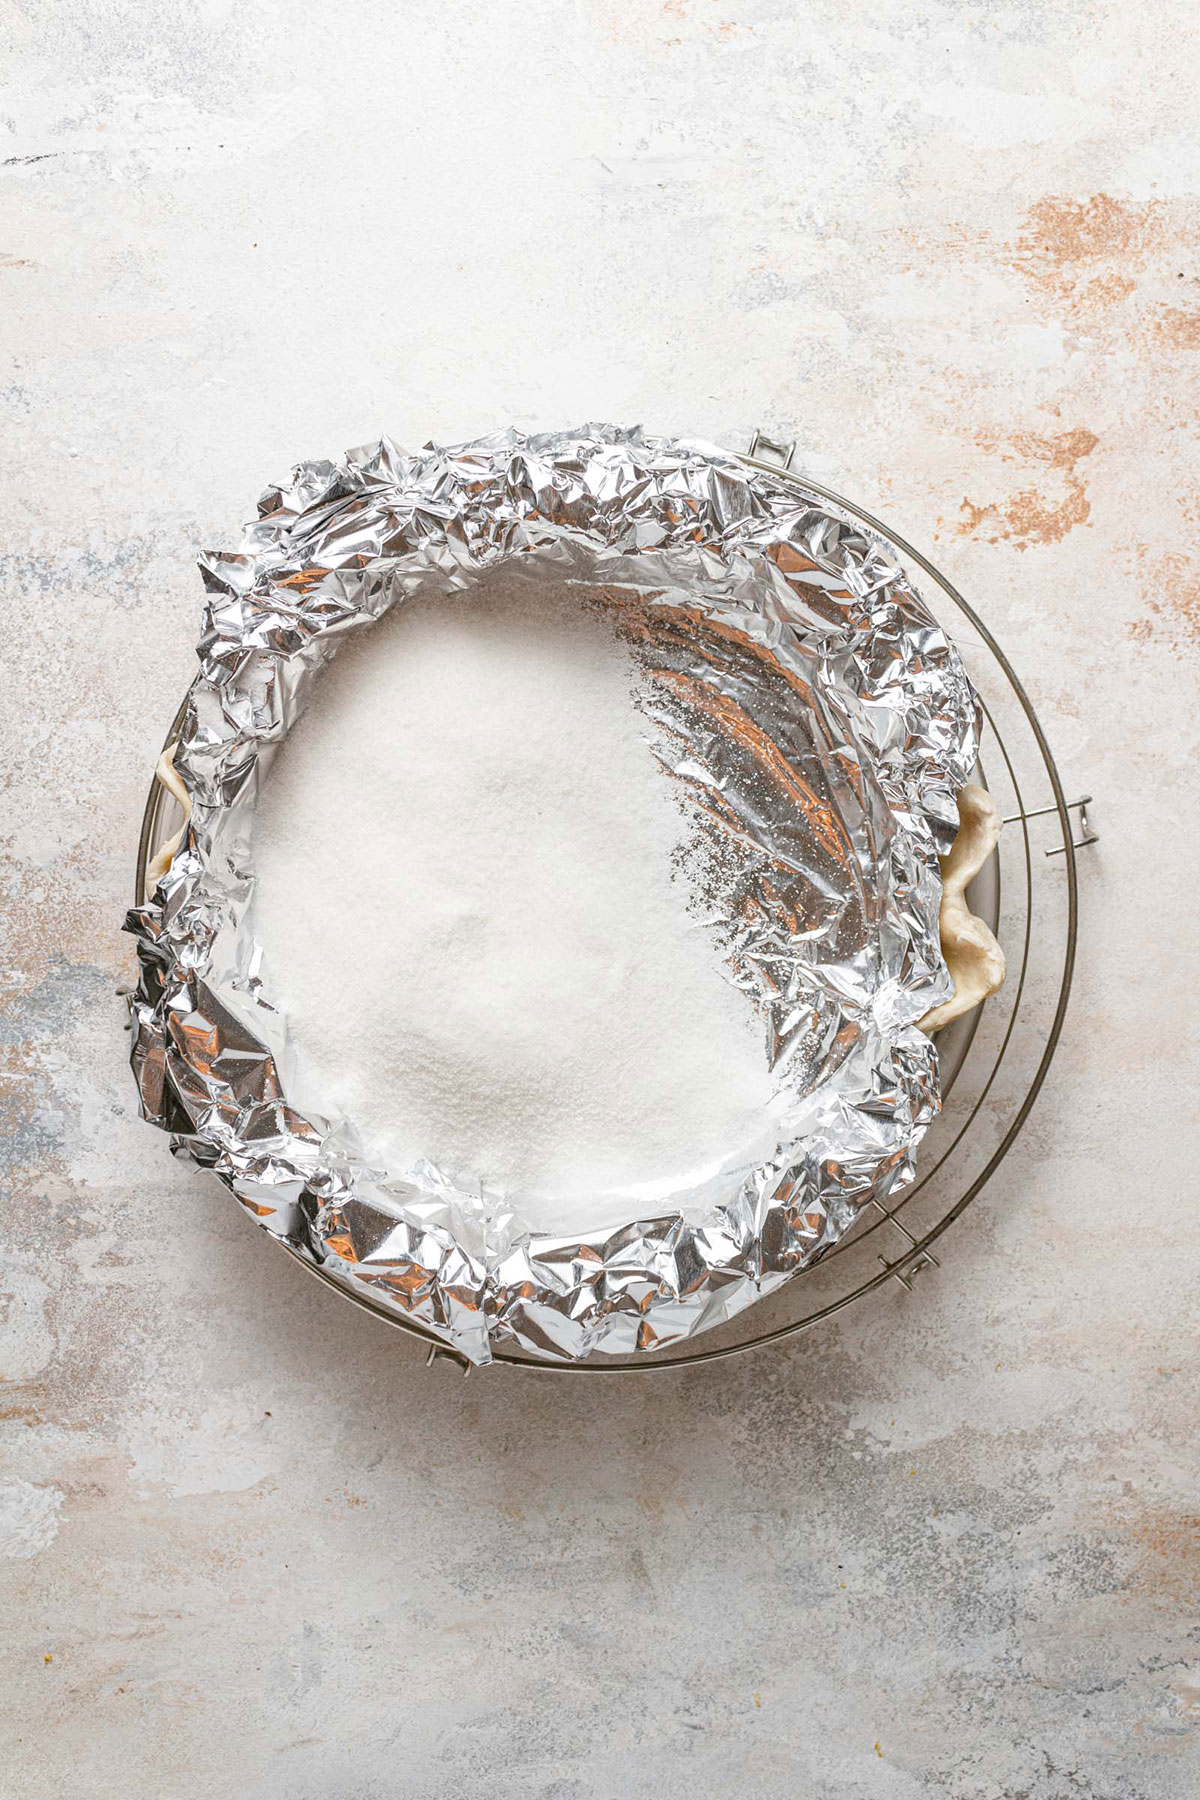 Blind baking a pie crust covered in foil.